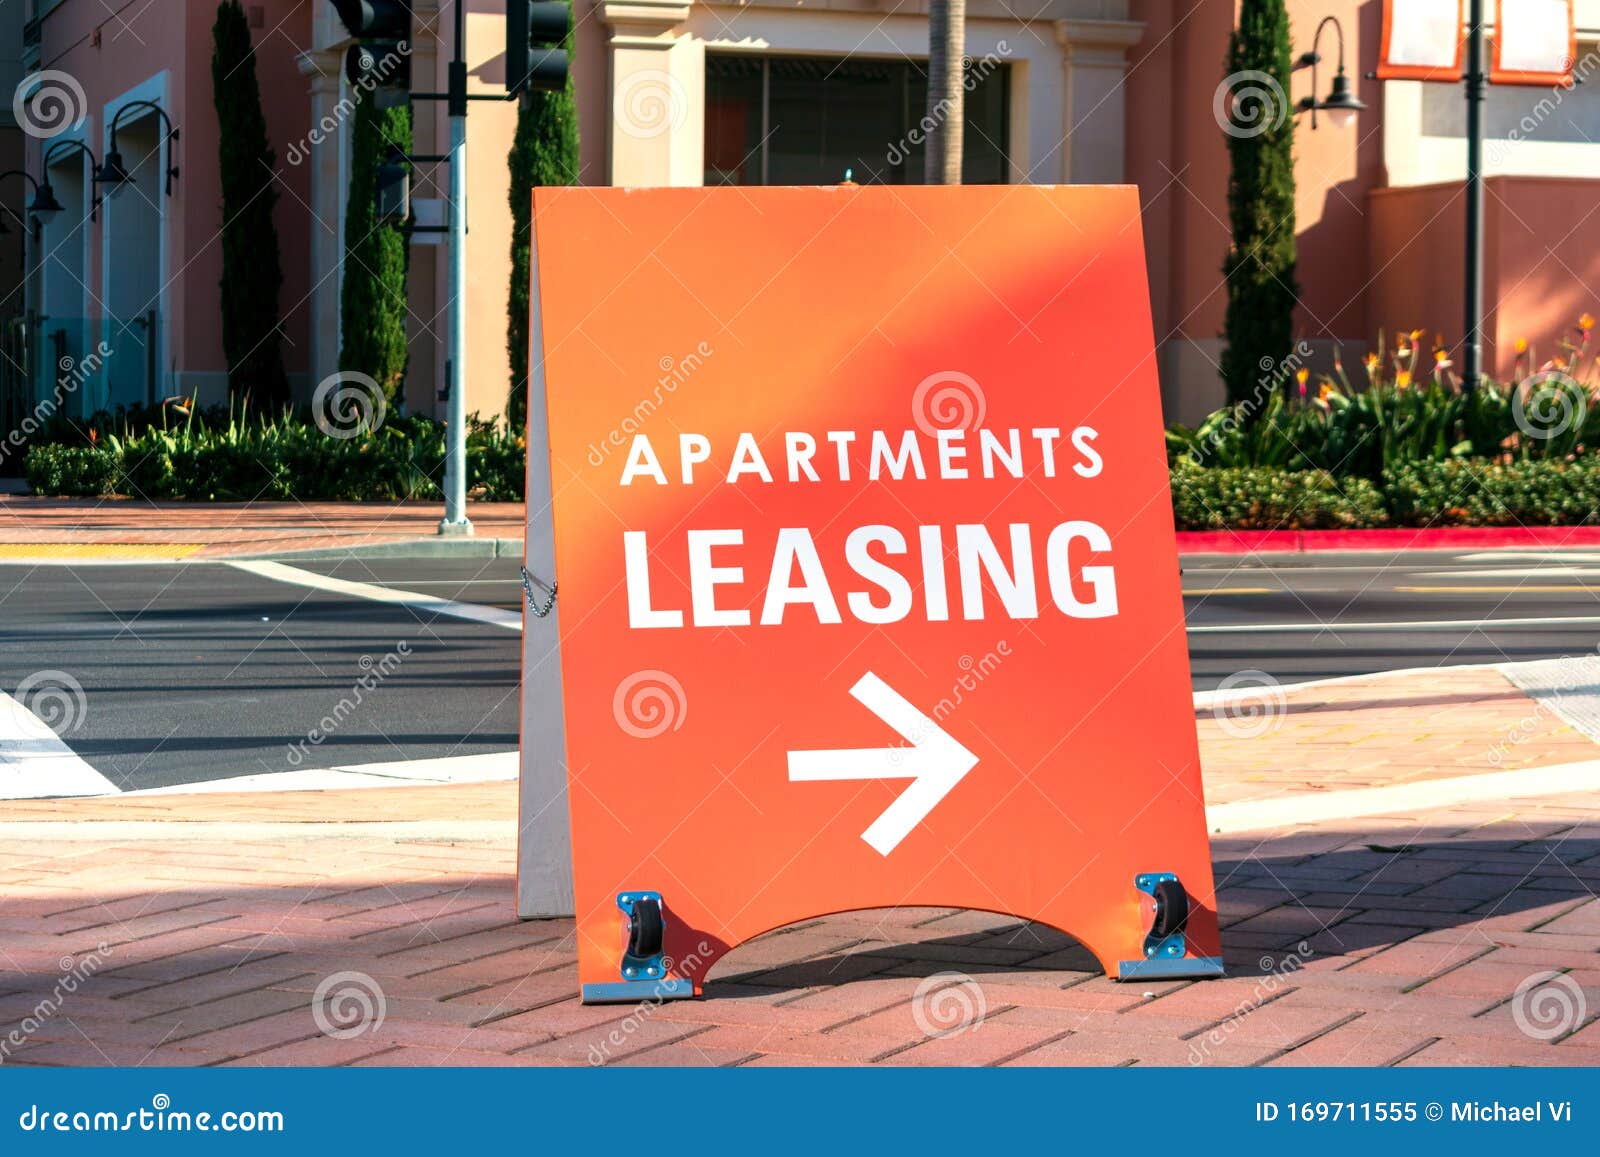 apartment leasing sign promote the rental property